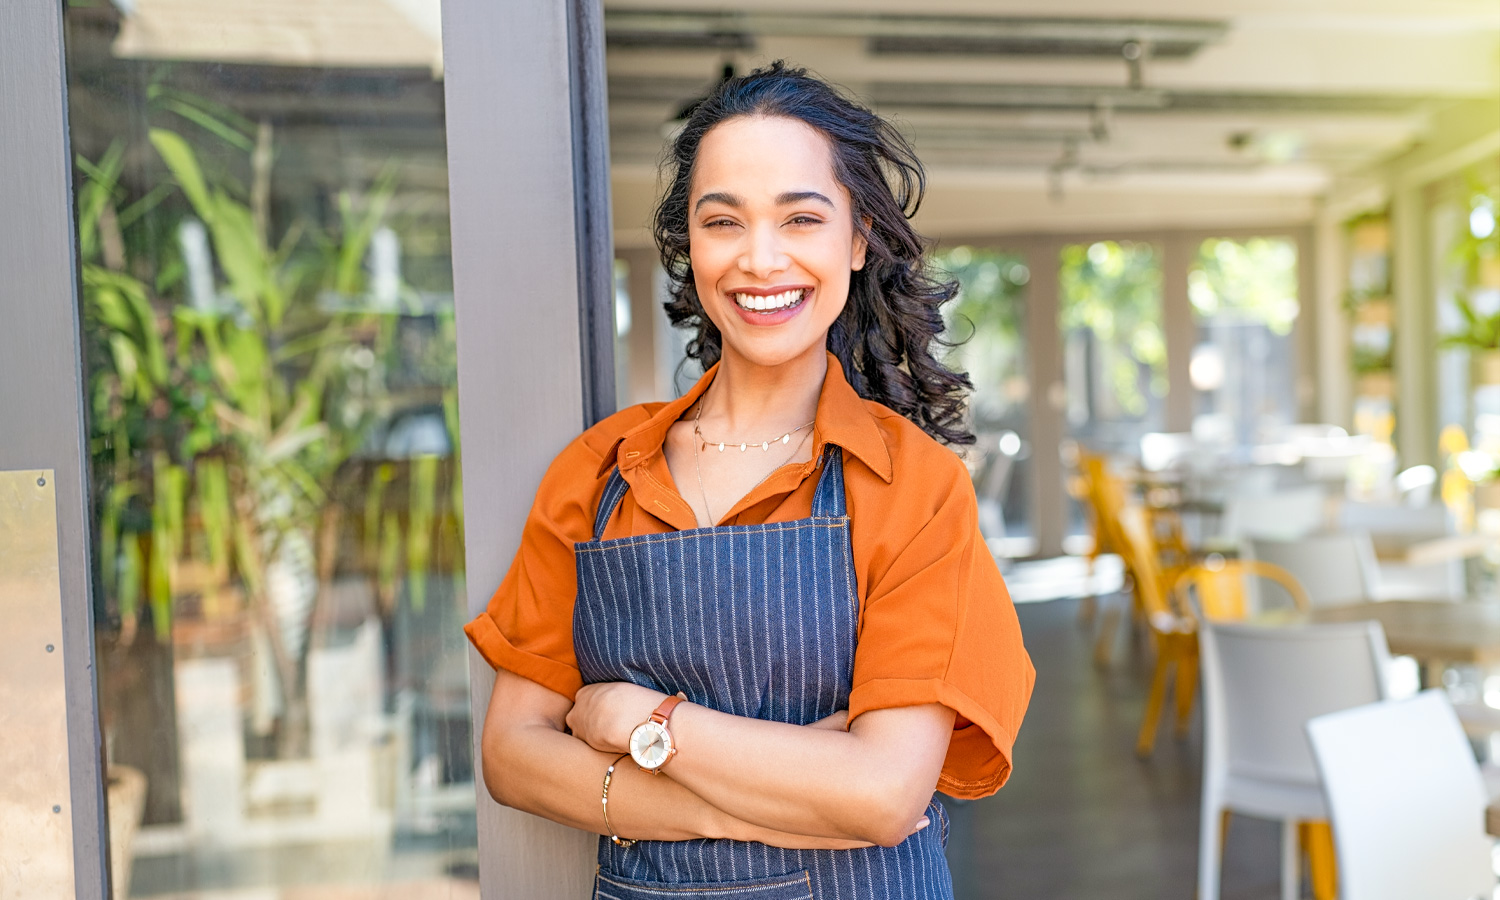 Woman with apron standing in front of business